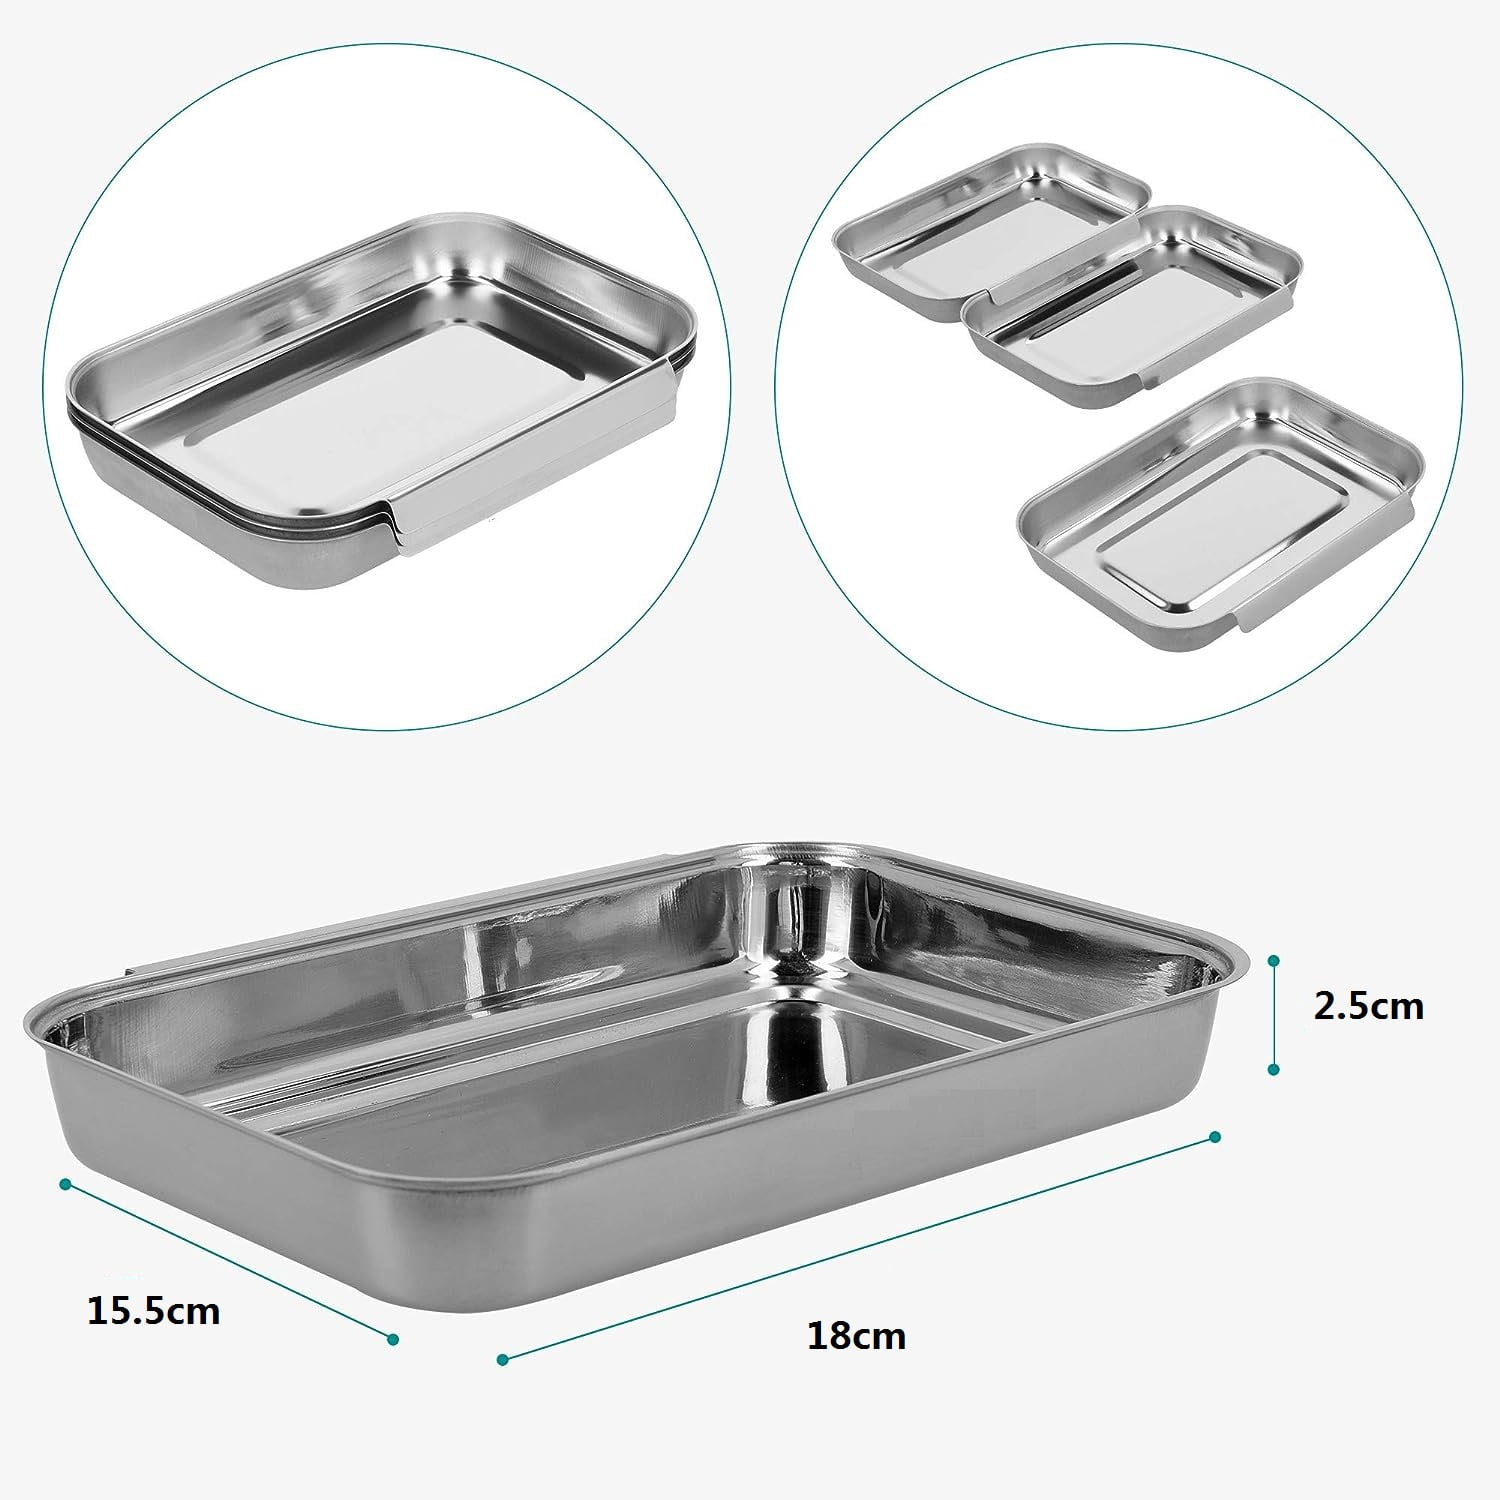 Breading Trays stainless steel 3 locking trays for meat, fish marinating 